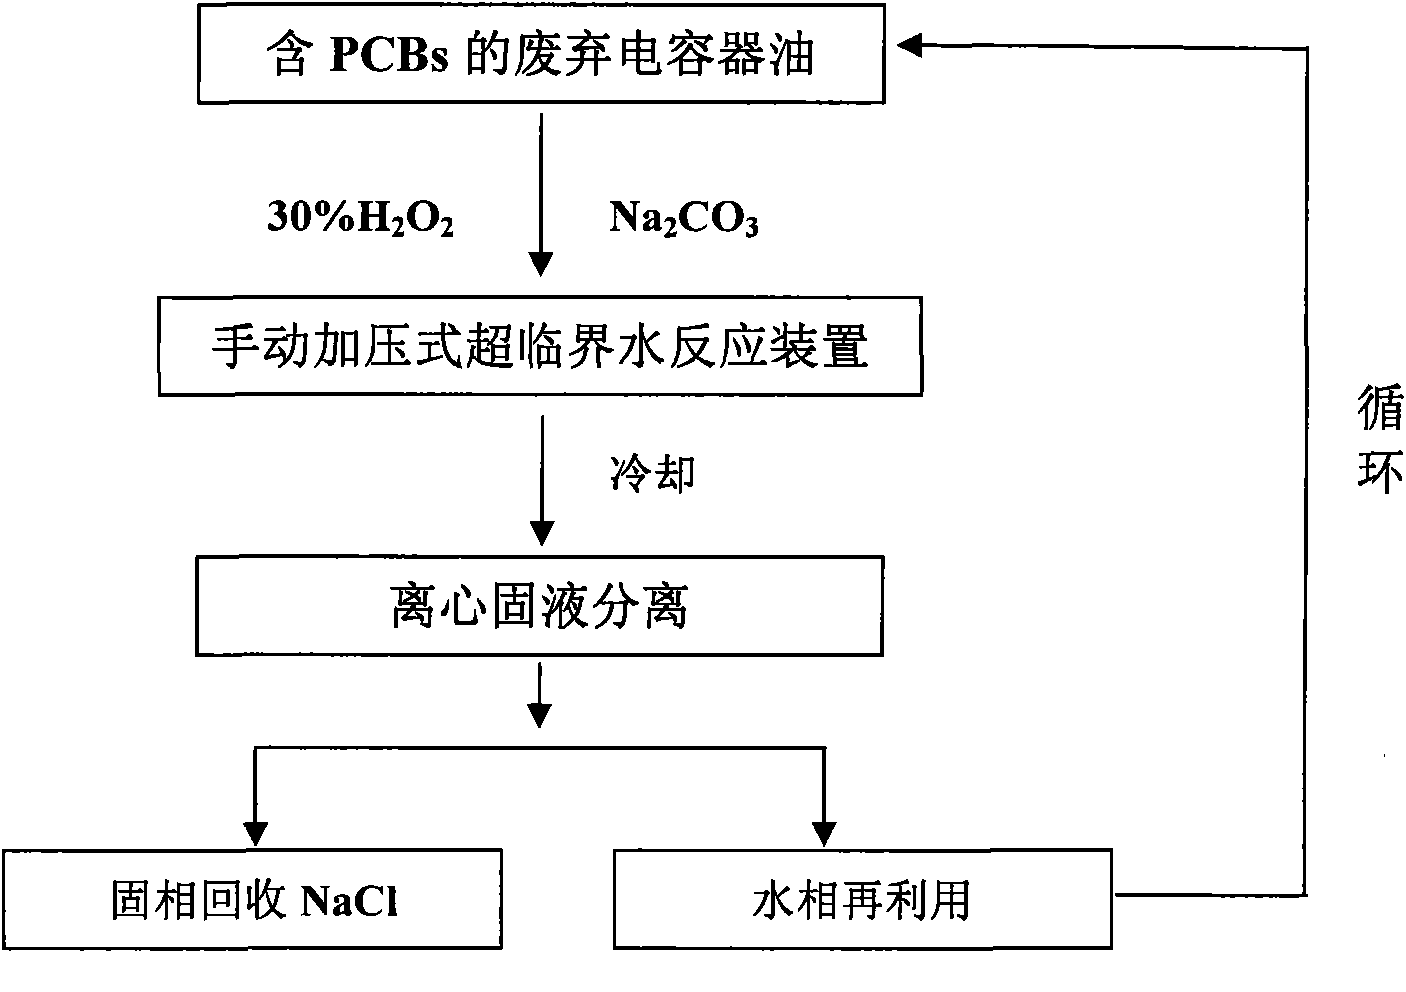 Technical process for supercritical water treatment of polychlorinated biphenyls (PCBs) waste and complete plant thereof